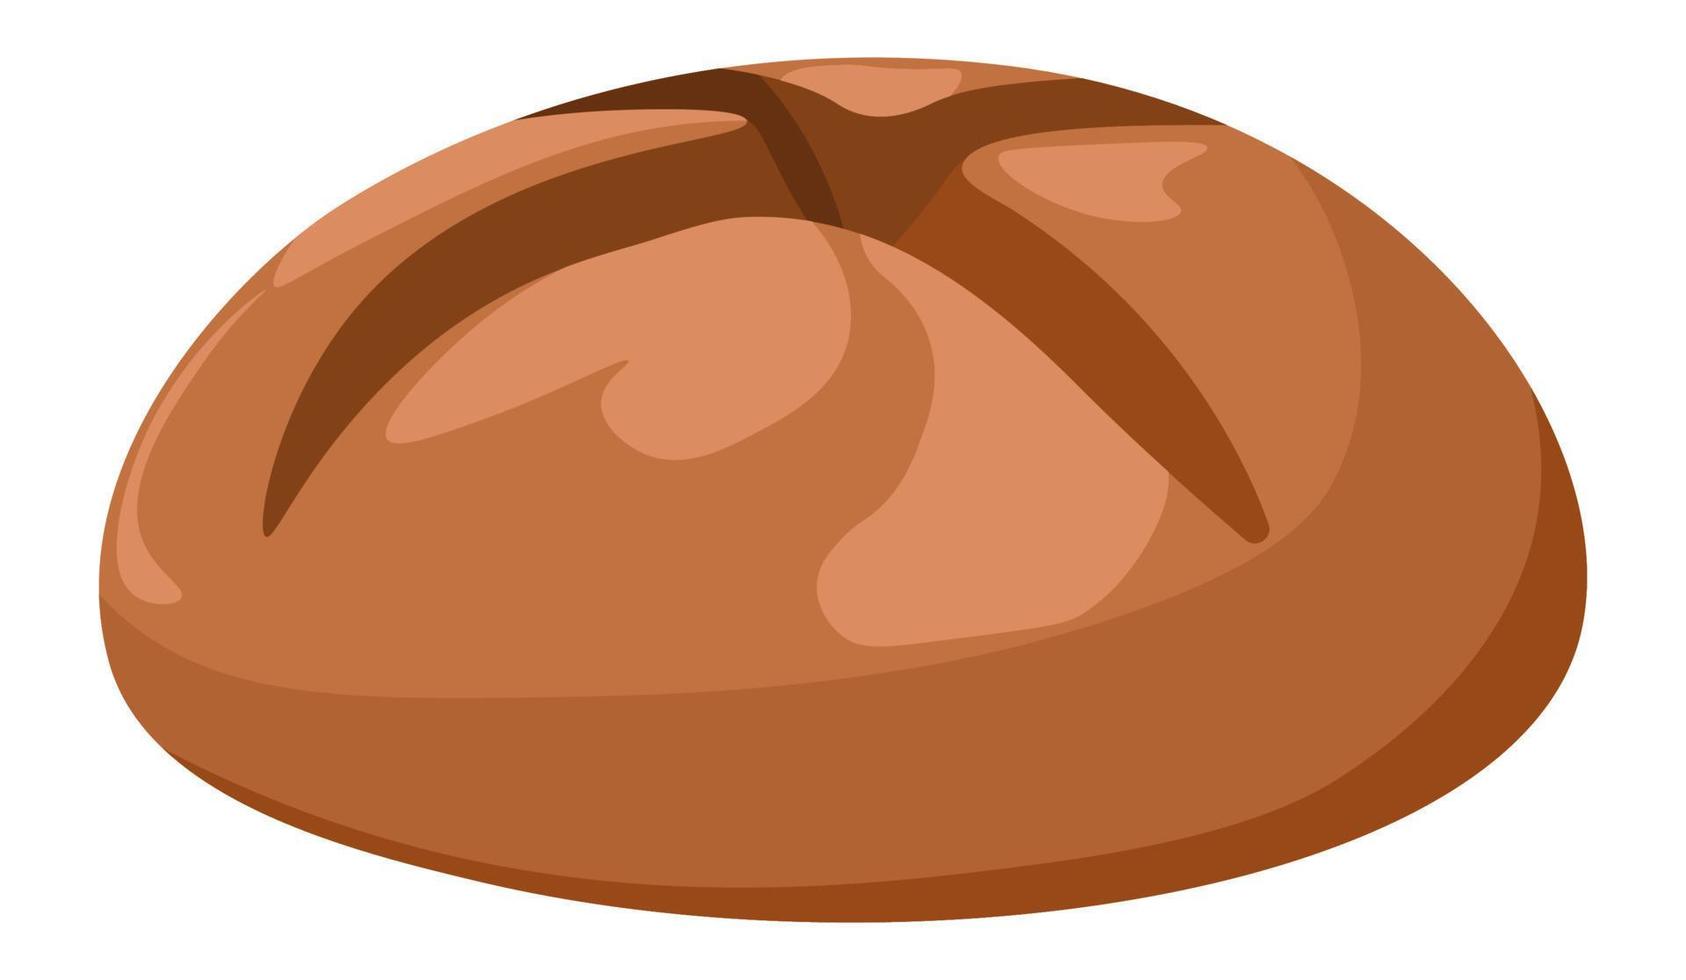 Loaf of bread, rye bakery product tasty meals vector